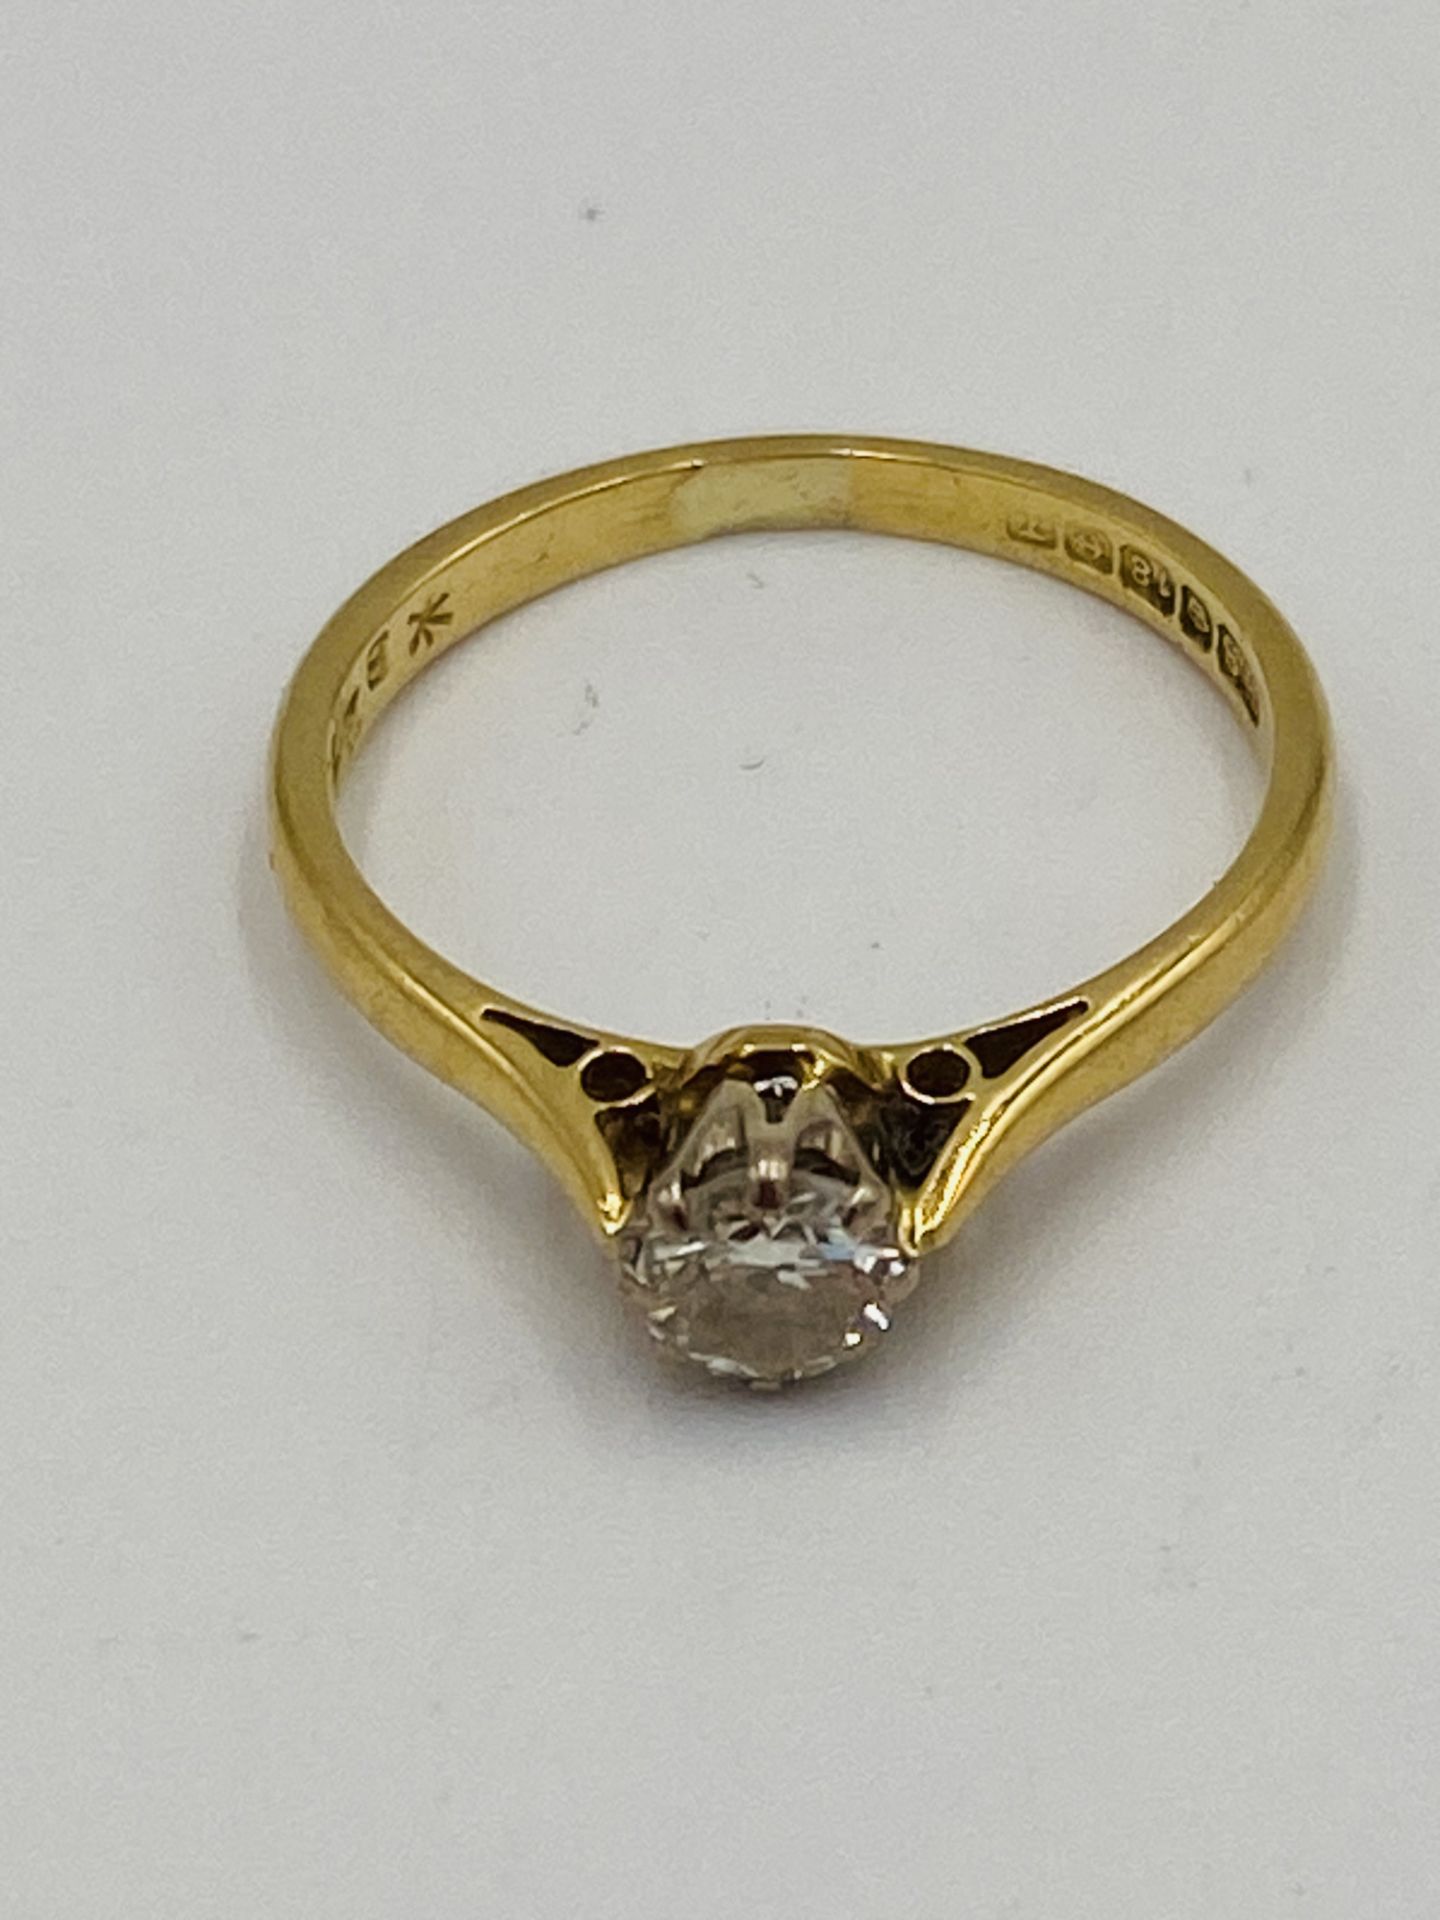 18ct gold solitaire ring - Image 2 of 6